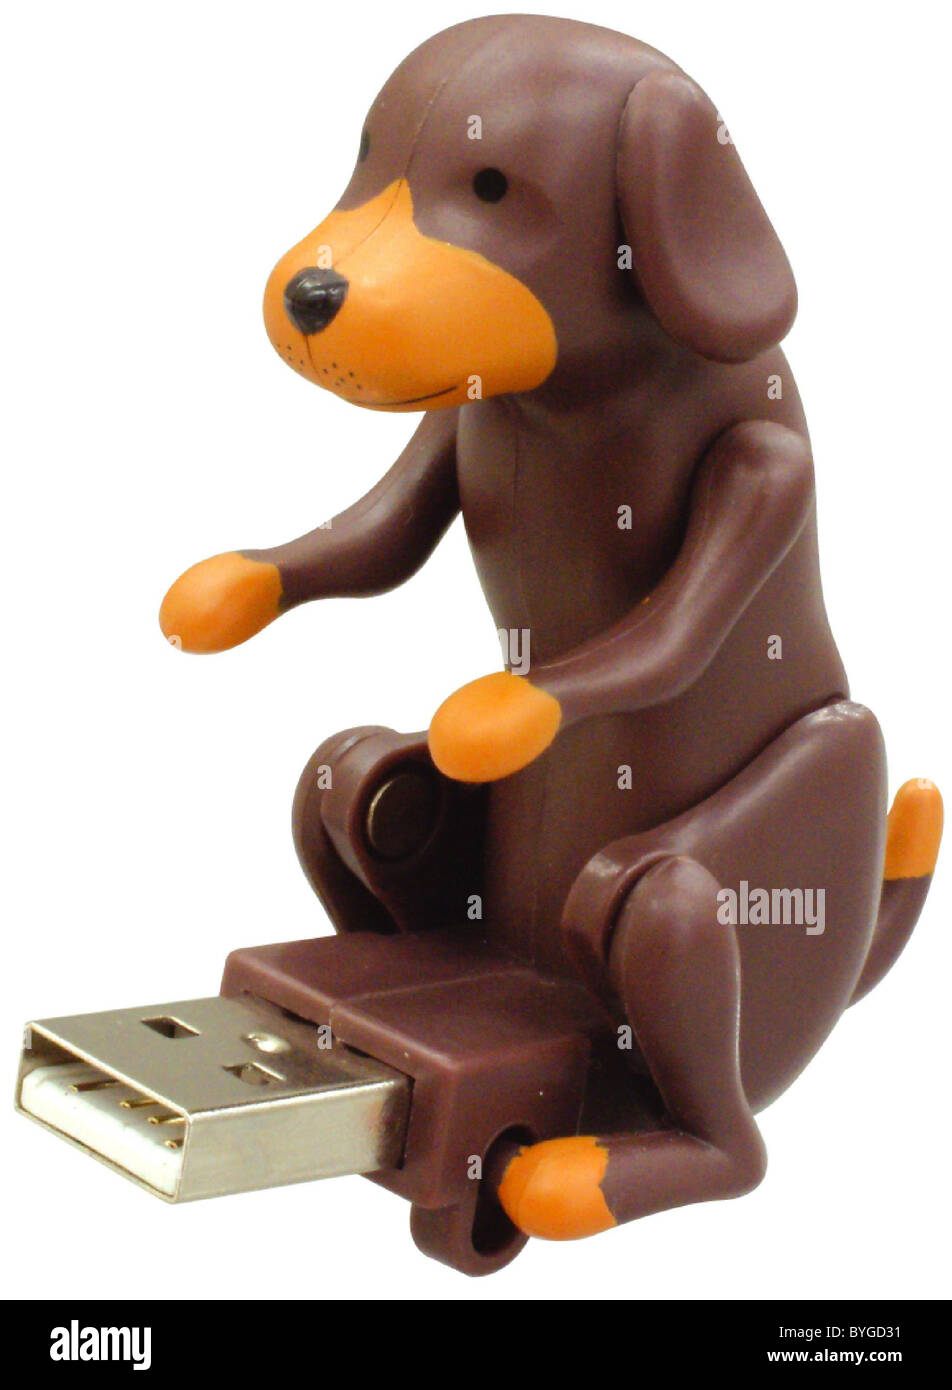 USB HUMPING DOG Surely designed for office workers with one thing on their mind, the USB Humping Dog can away the Stock Photo - Alamy